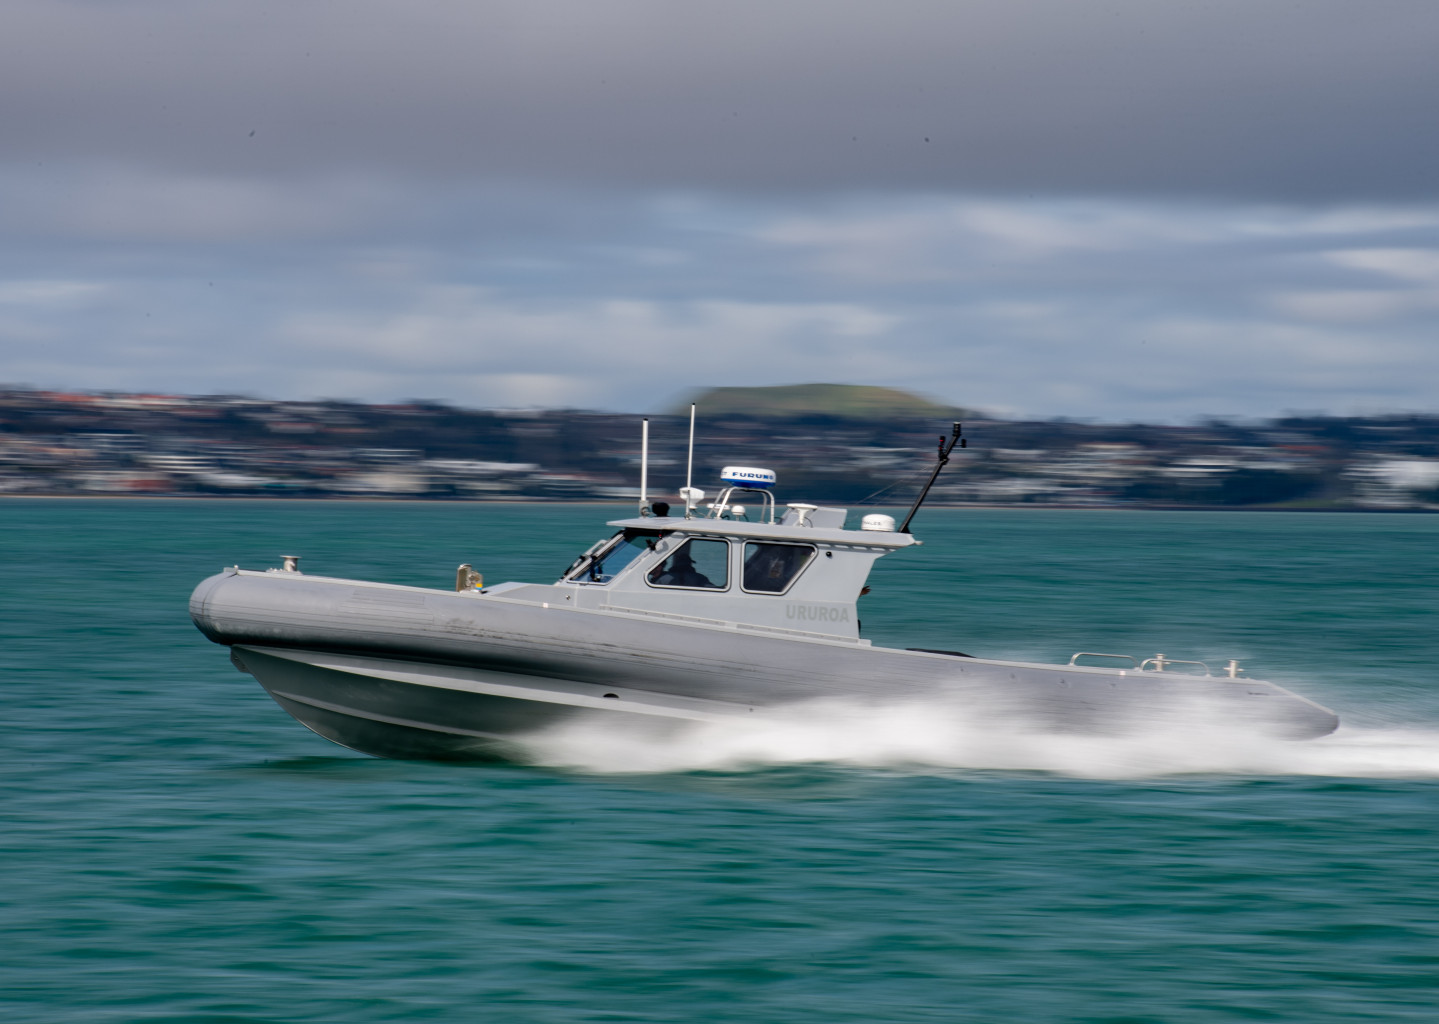 Littoral Manoeuvre Crafts Strengthens Royal New Zealand Navy’s Capability